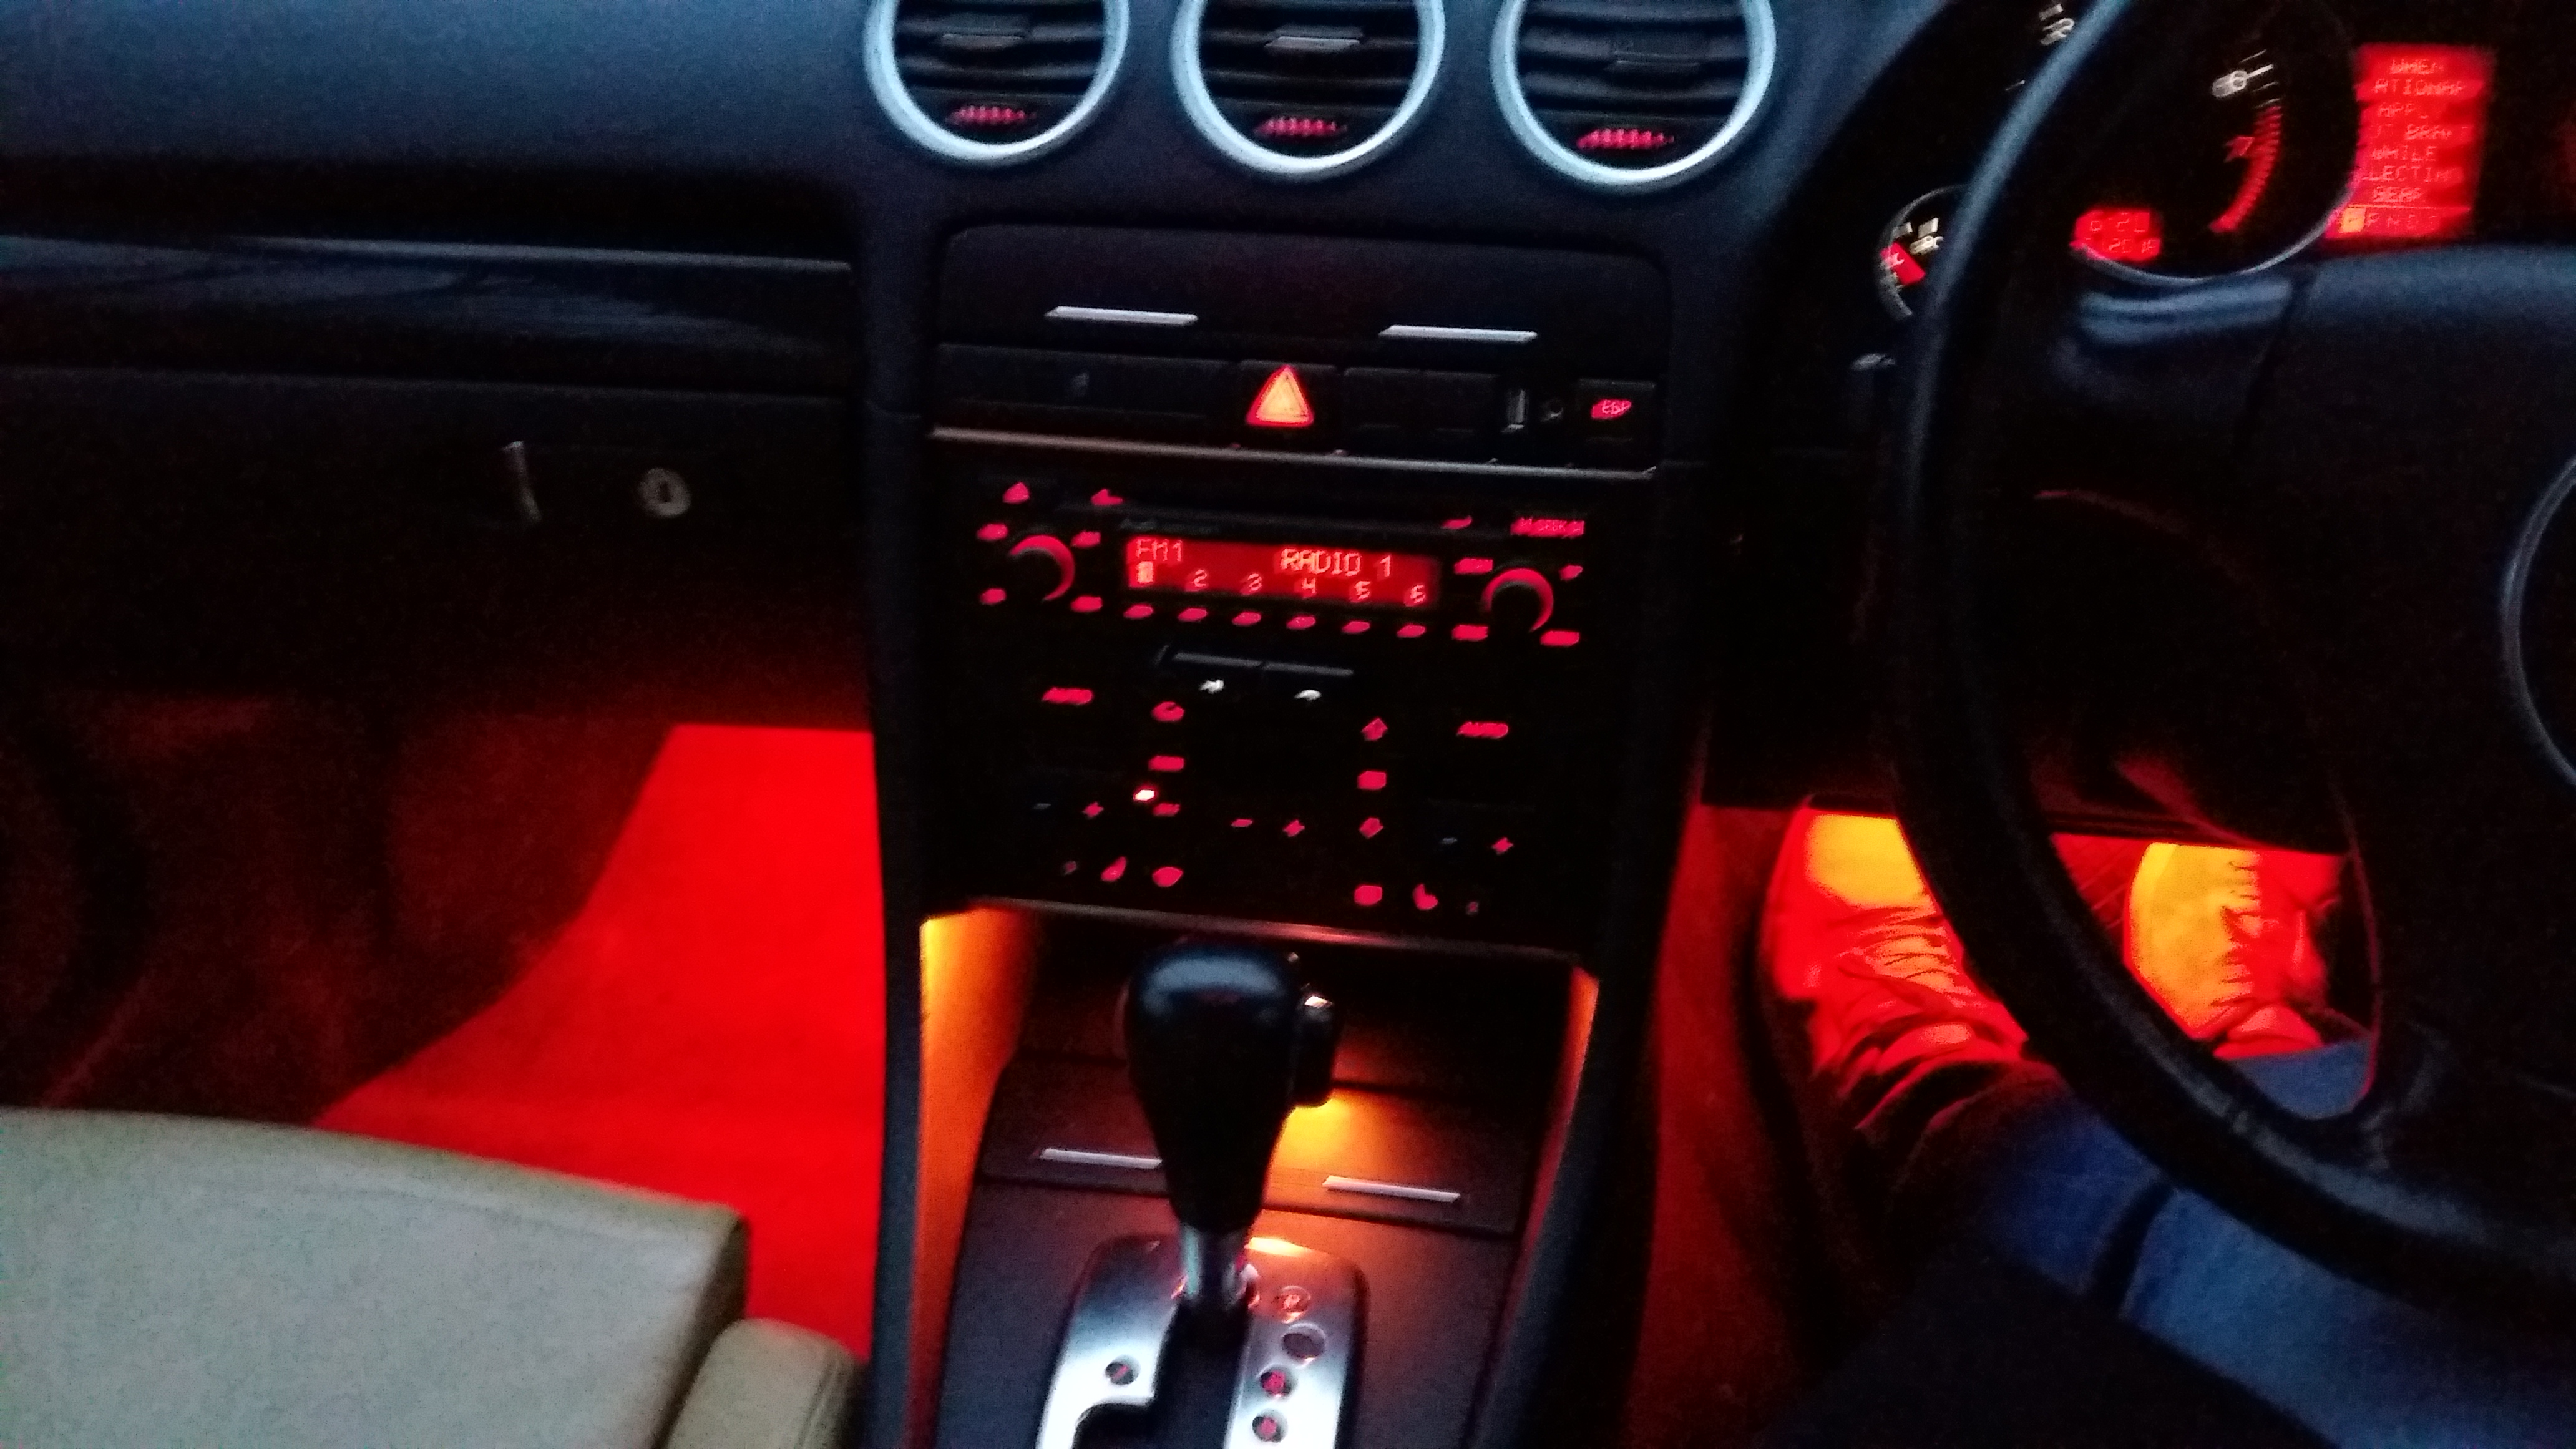 Footwell lights not bad for £7 - AudiWorld